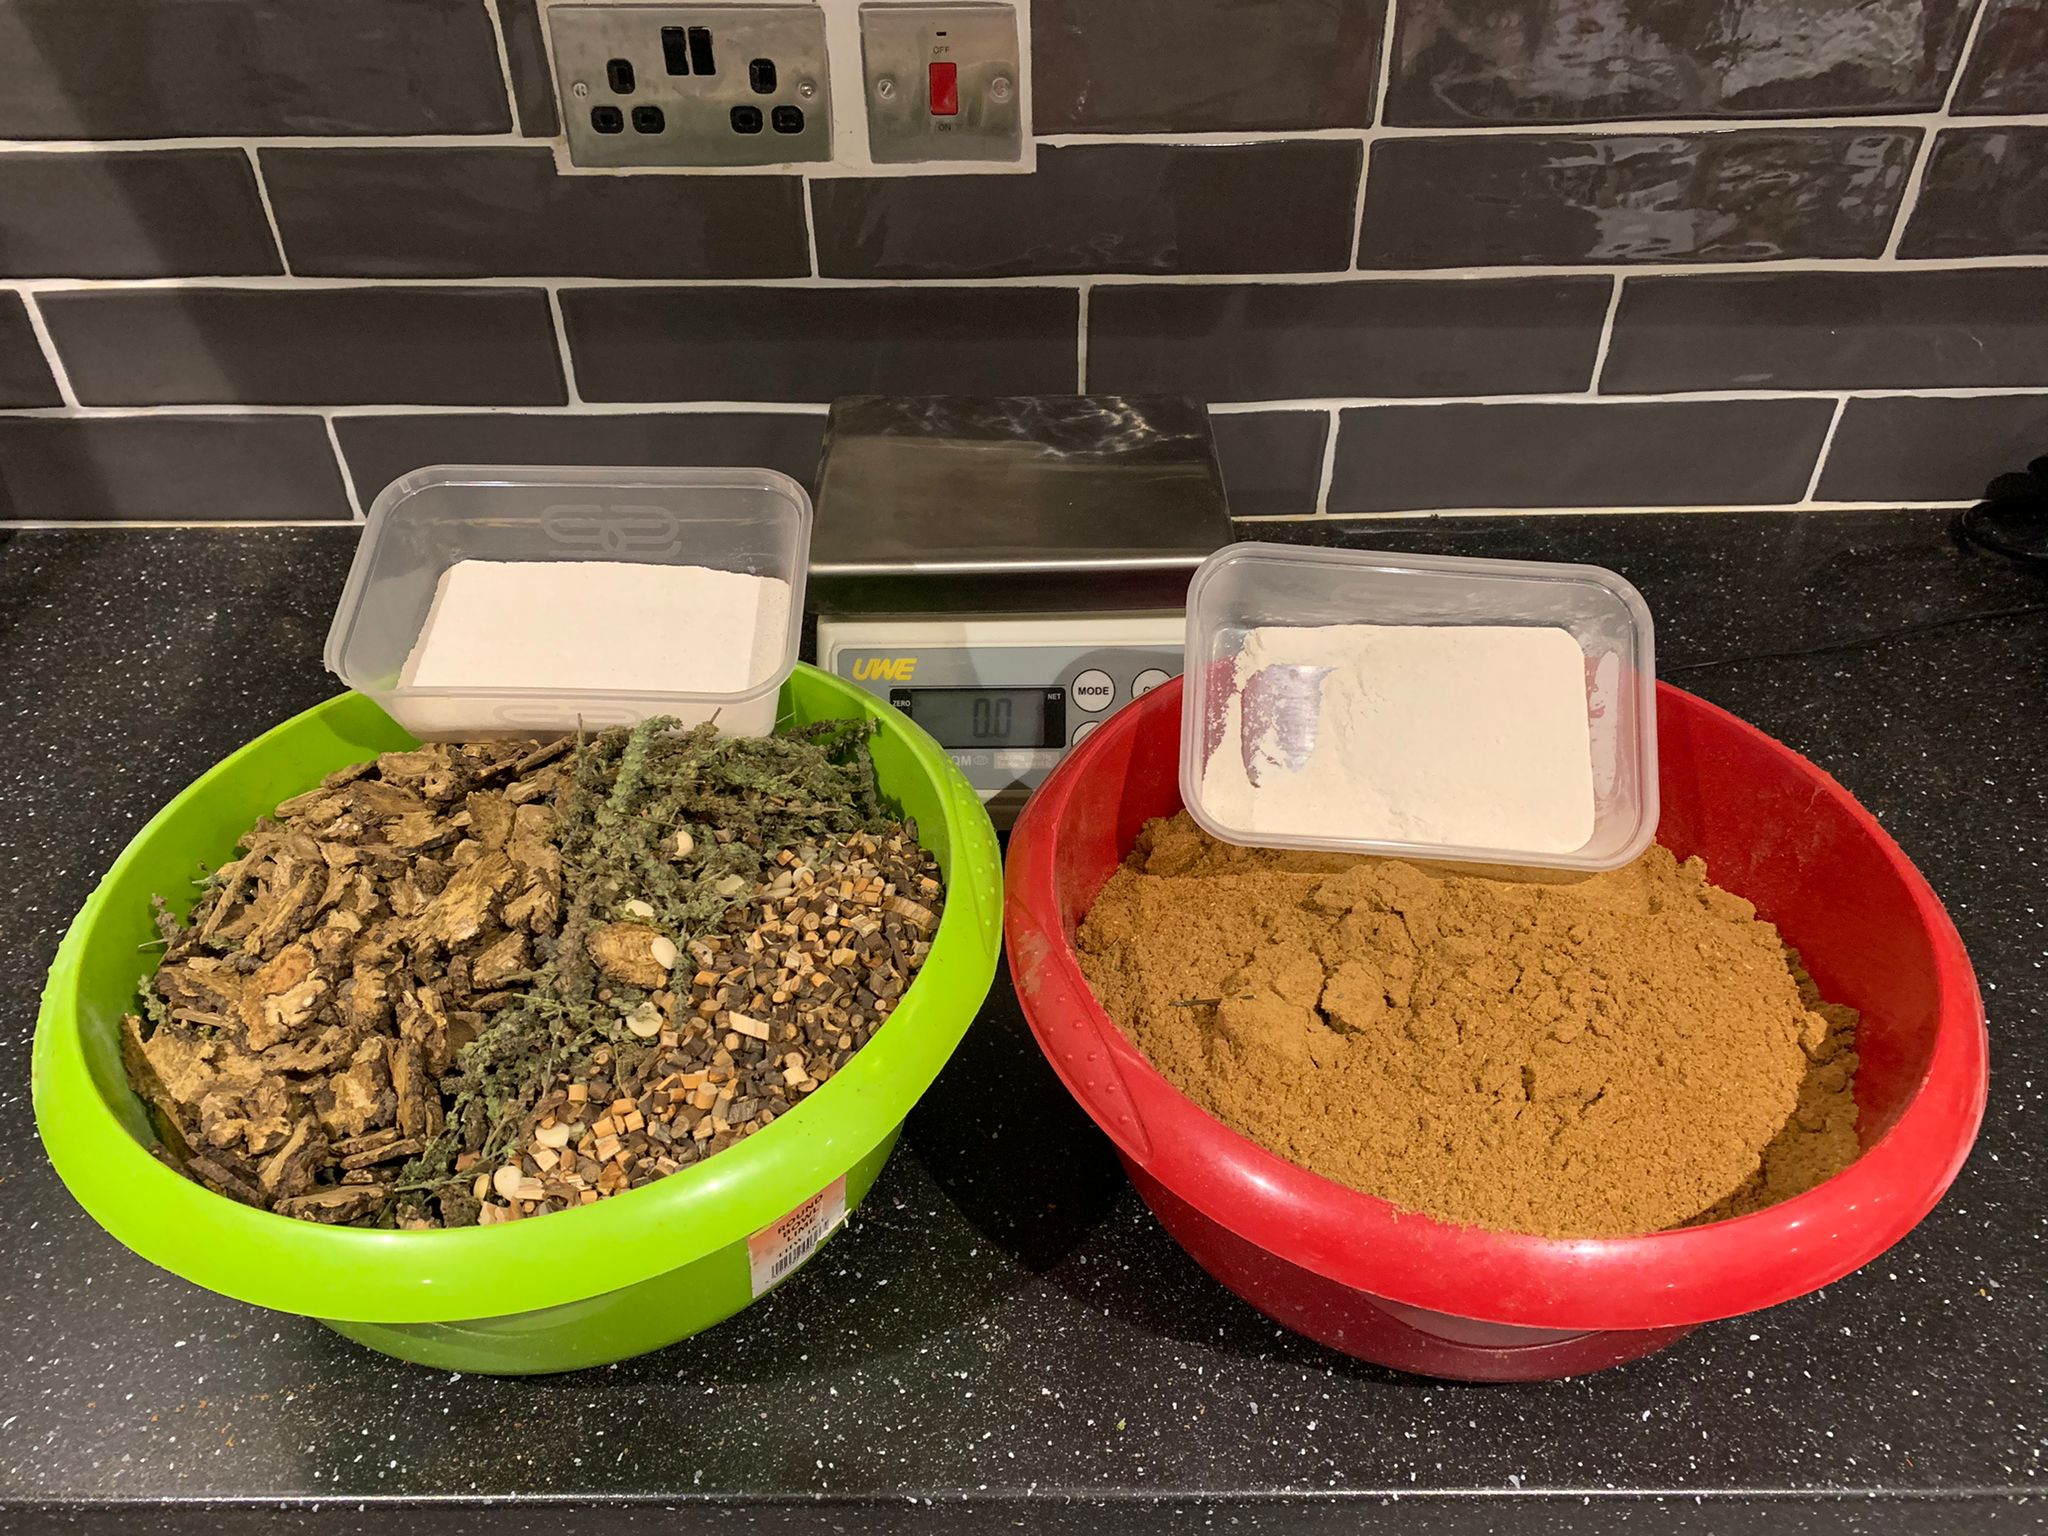 Dit Da Jow whole Herbs before and after milling